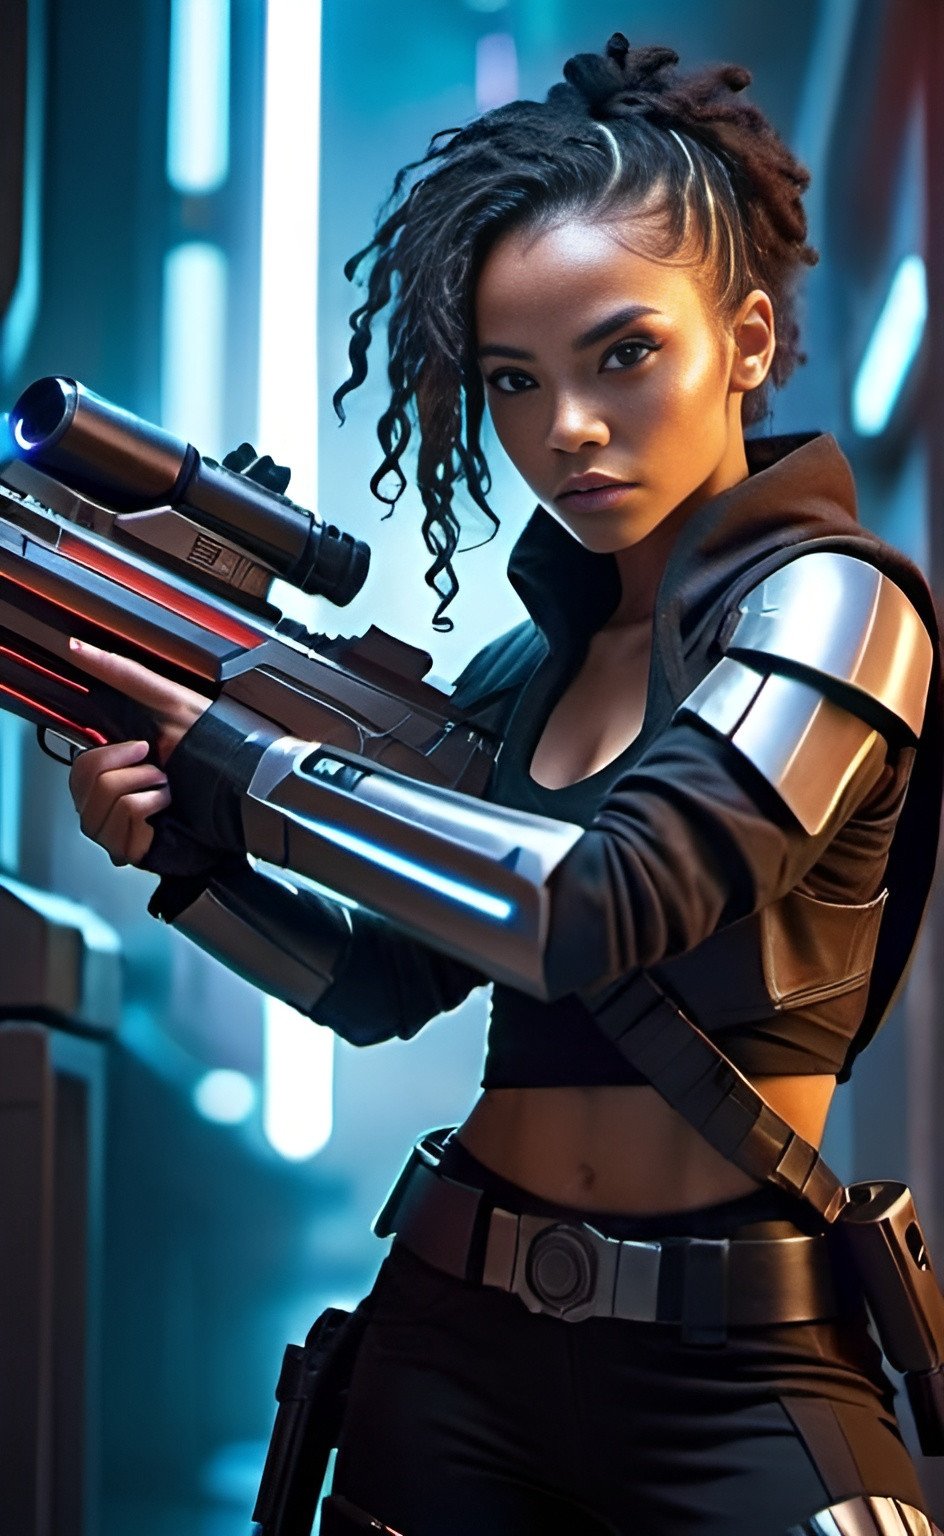 Prompt: Mixed-race dark-Jedi wielding blaster rifle, sci-fi, action-packed, intense lighting, highres, detailed outfit and blaster, futuristic setting, dramatic pose, cool tones, cyberpunk, futuristic